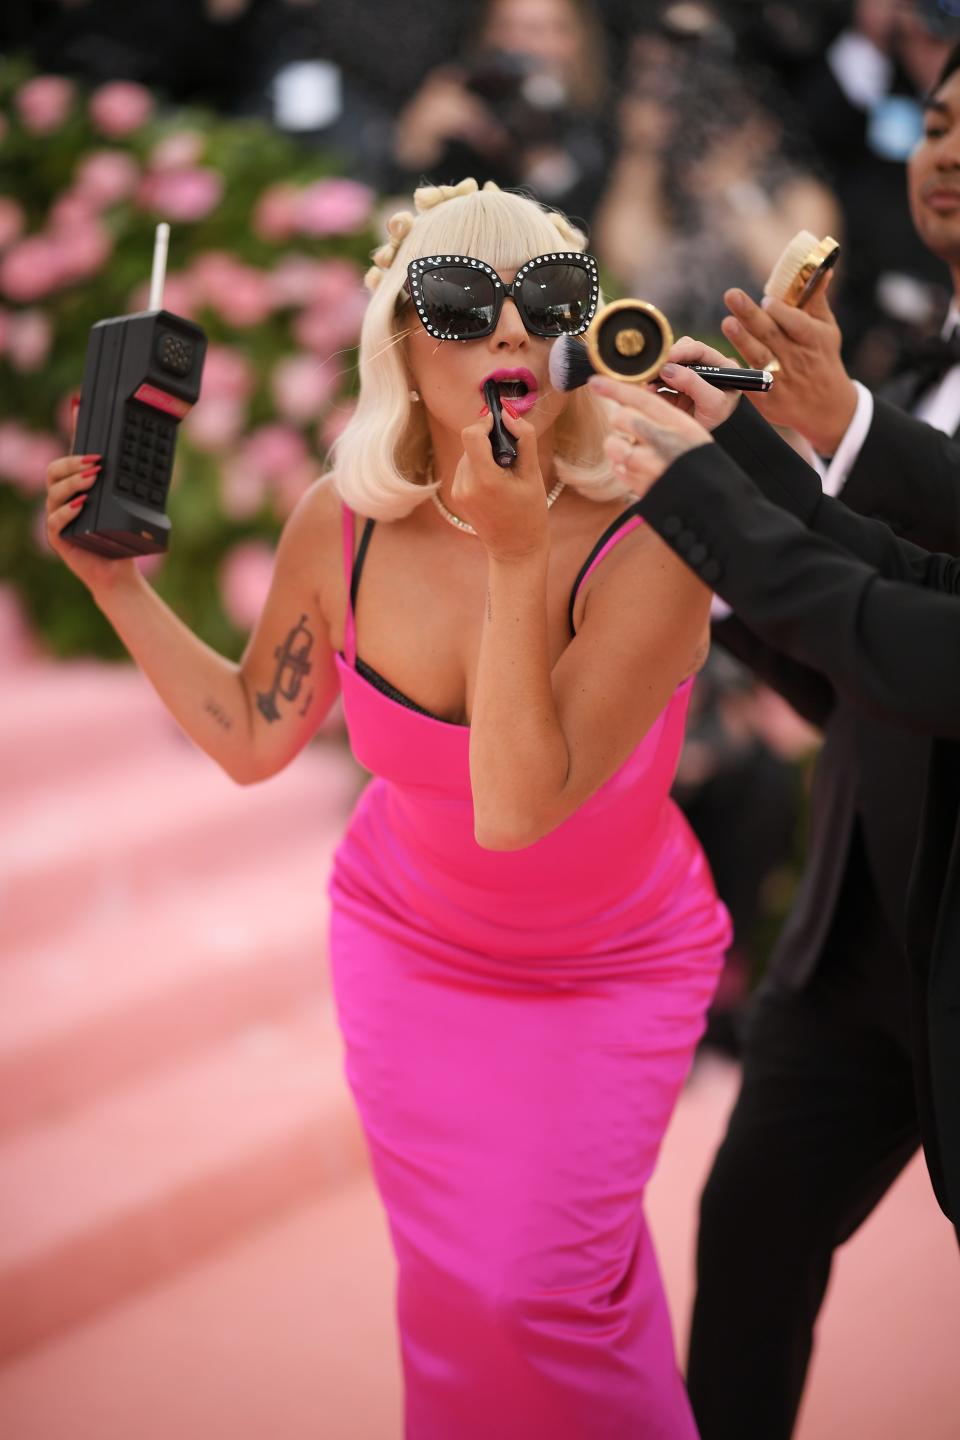 Lady Gaga, wearing a tight hot pink dress, applies lipstick and holds a large phone prop while men in suits hold hair and makeup brushes to her head.